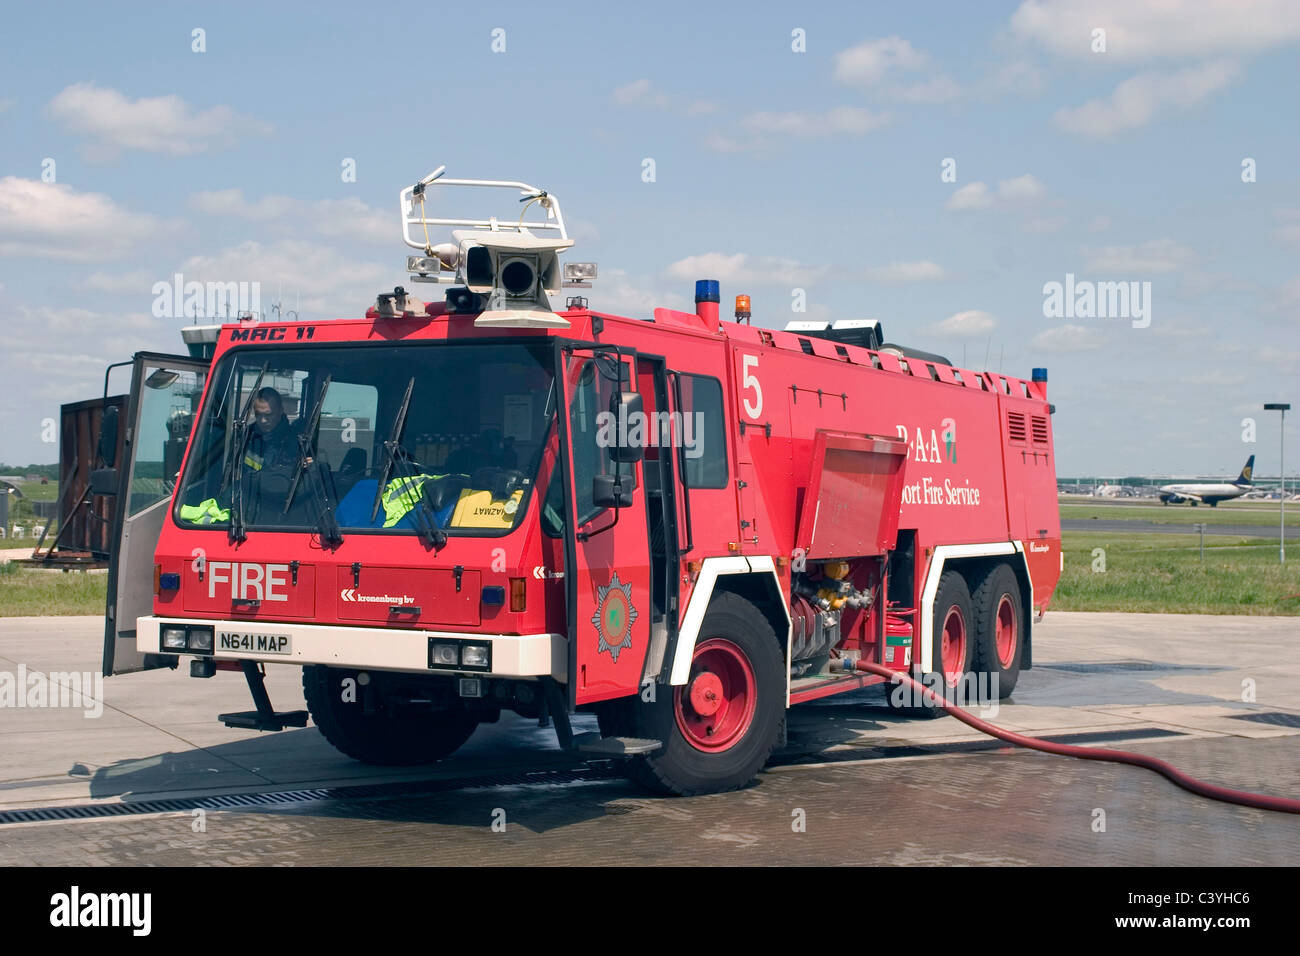 Airport fire truck Stock Photo